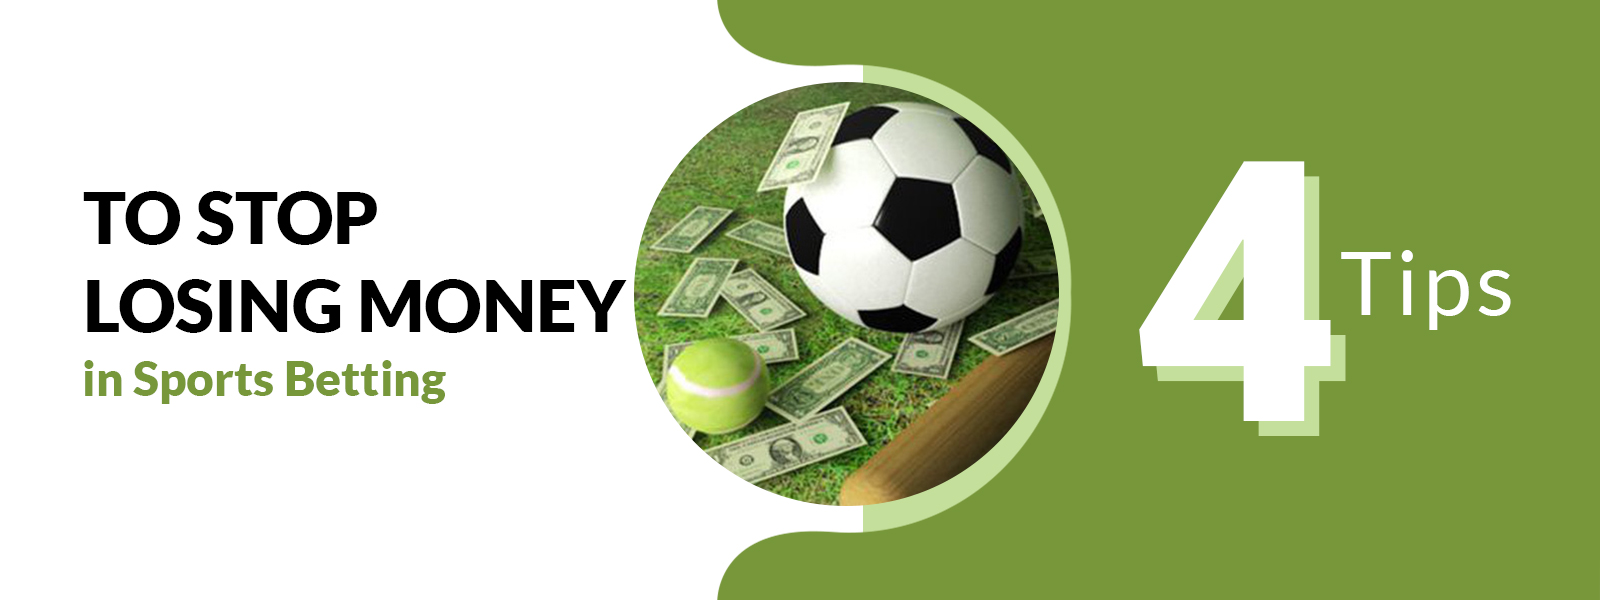 How To Stop Losing Money In Sports Betting